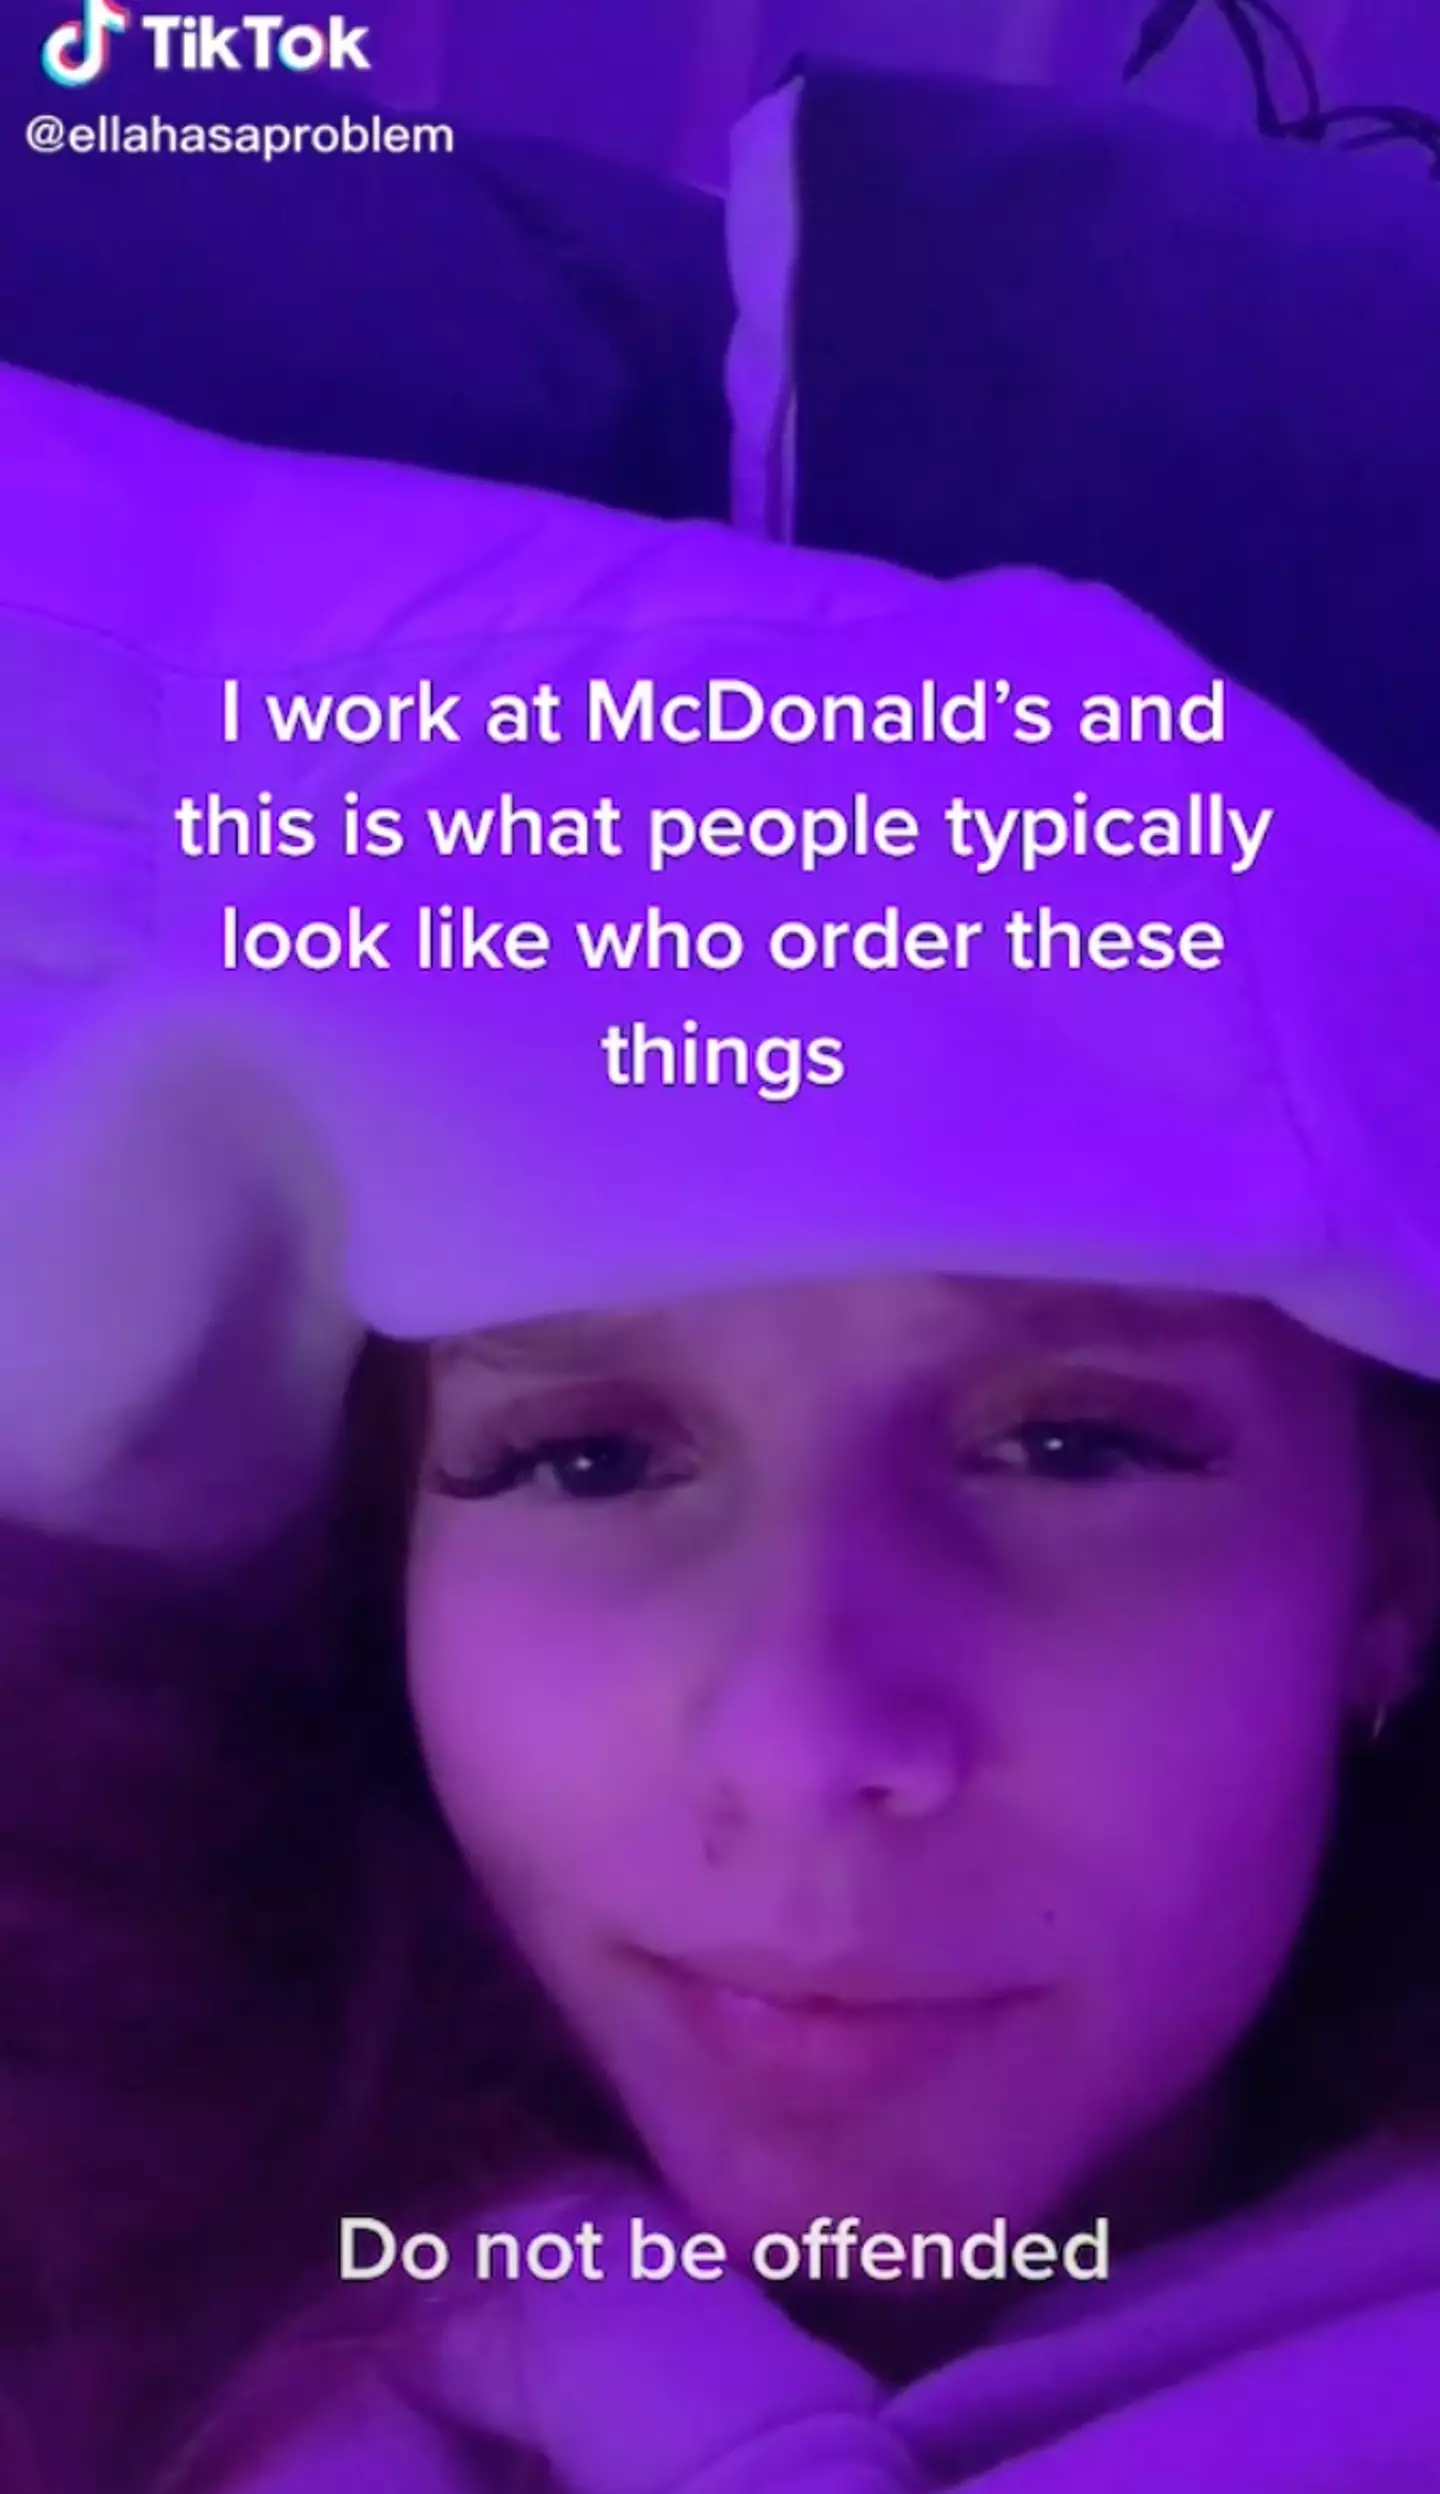 Do you fit any of the McDonald's order stereotypes?